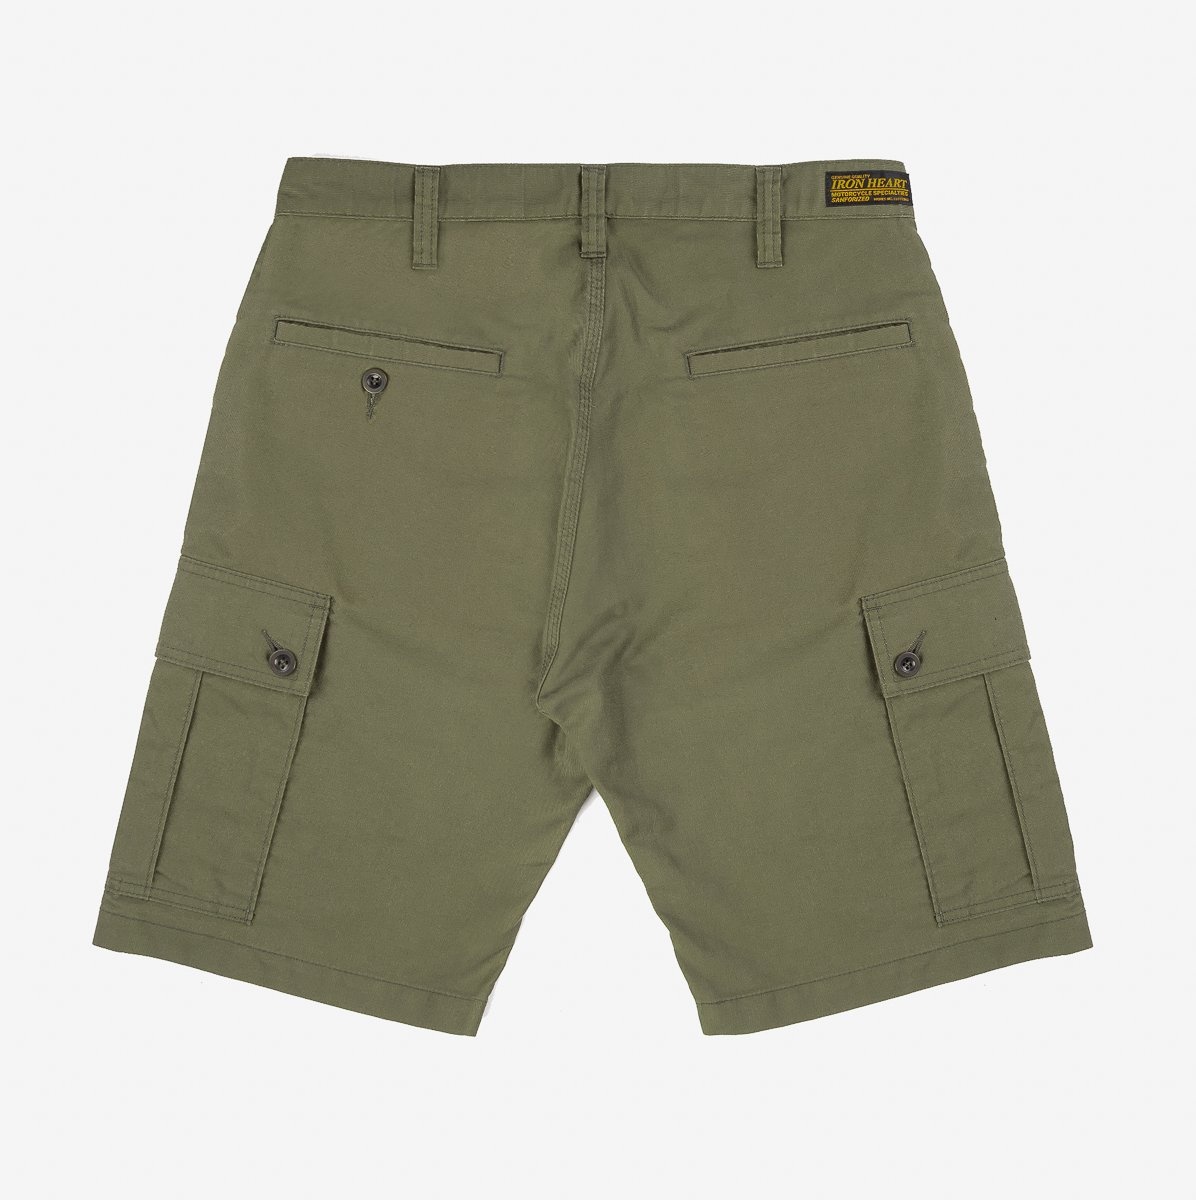 7.4oz Cotton Whipcord Camp Shorts - Olive - 4